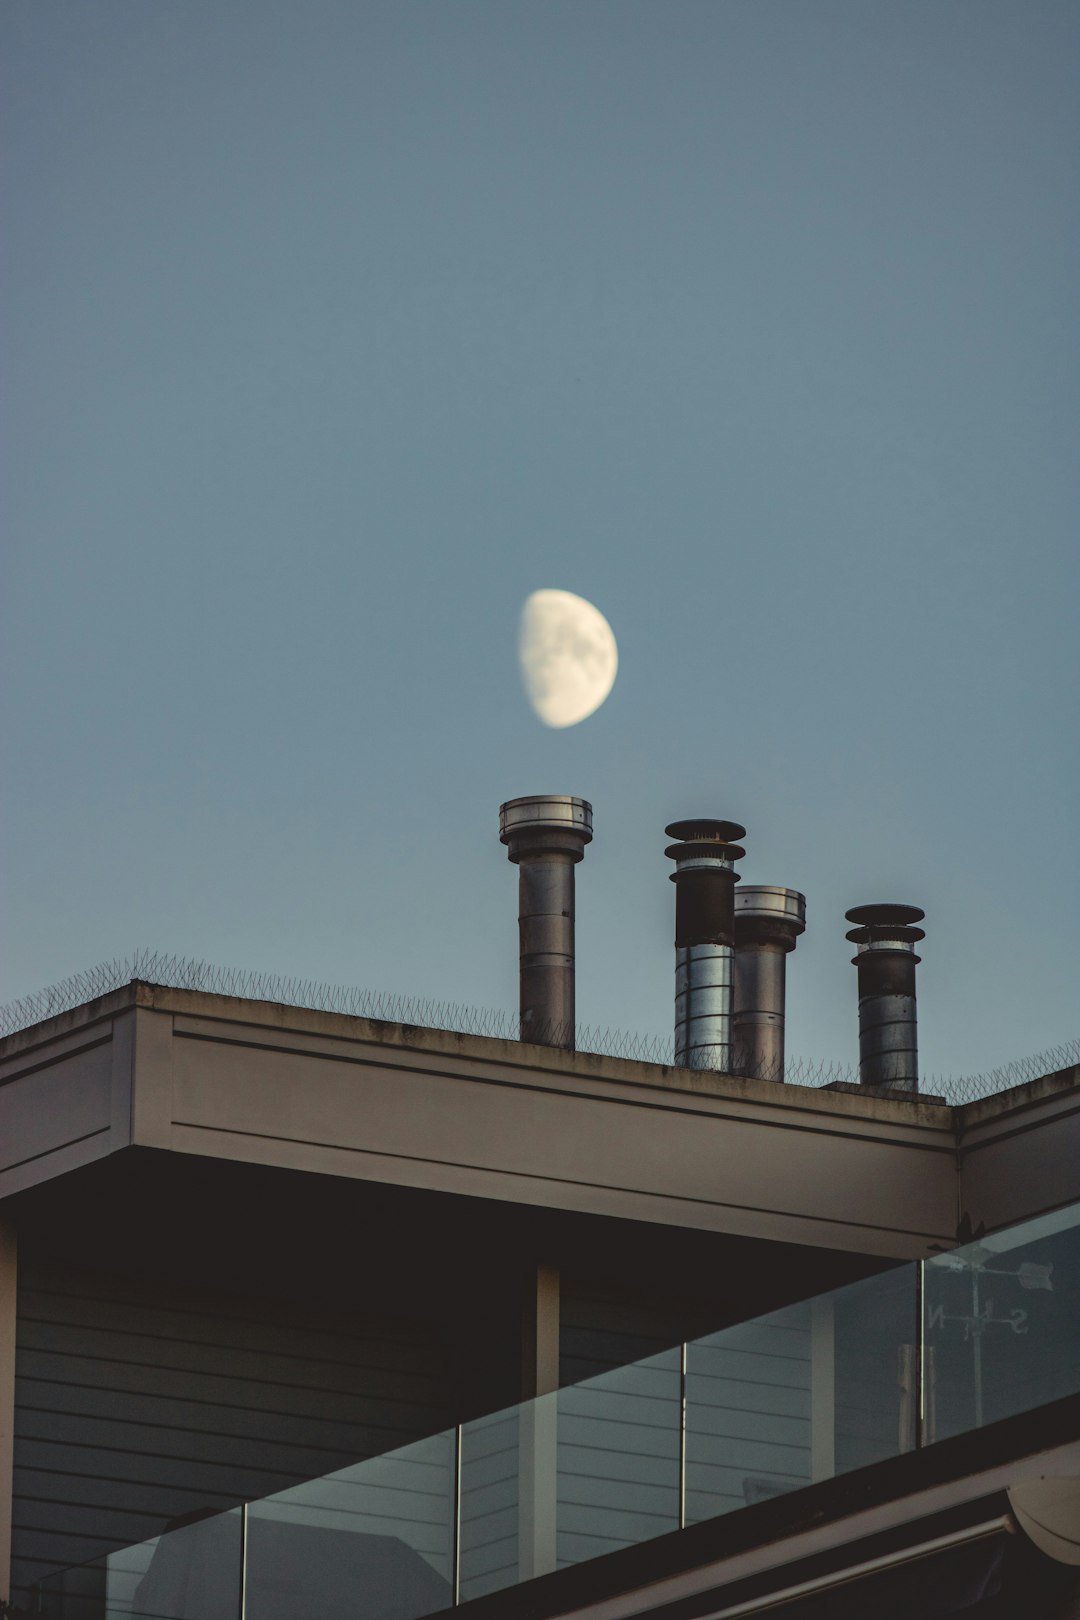  view of the moon on the sky and chimneys chimney